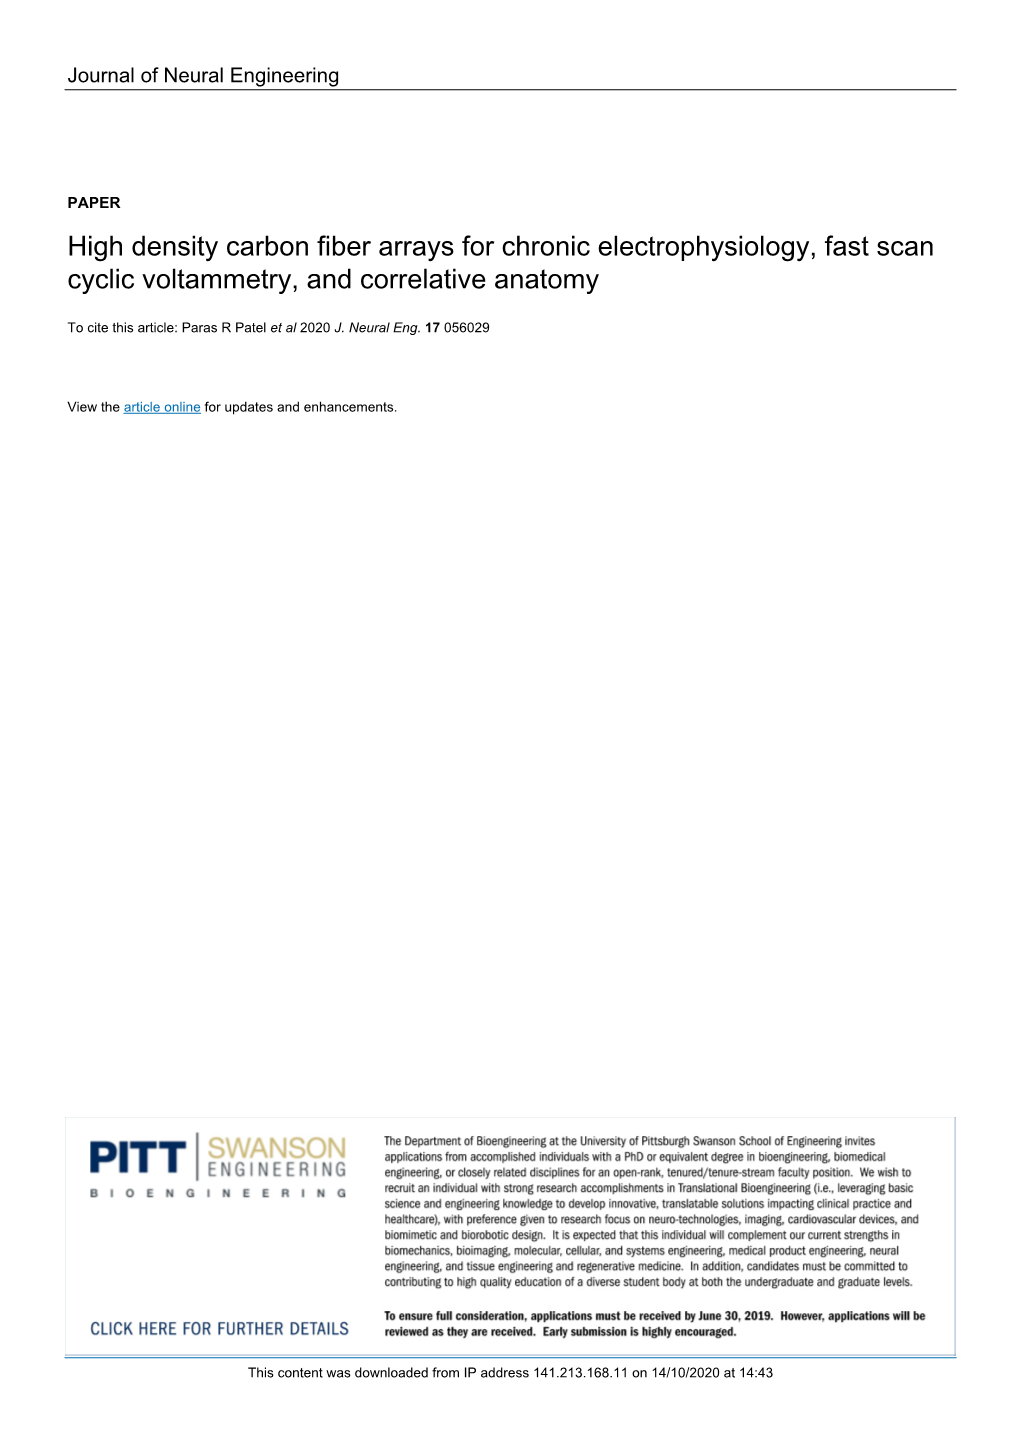 High Density Carbon Fiber Arrays for Chronic Electrophysiology, Fast Scan Cyclic Voltammetry, and Correlative Anatomy